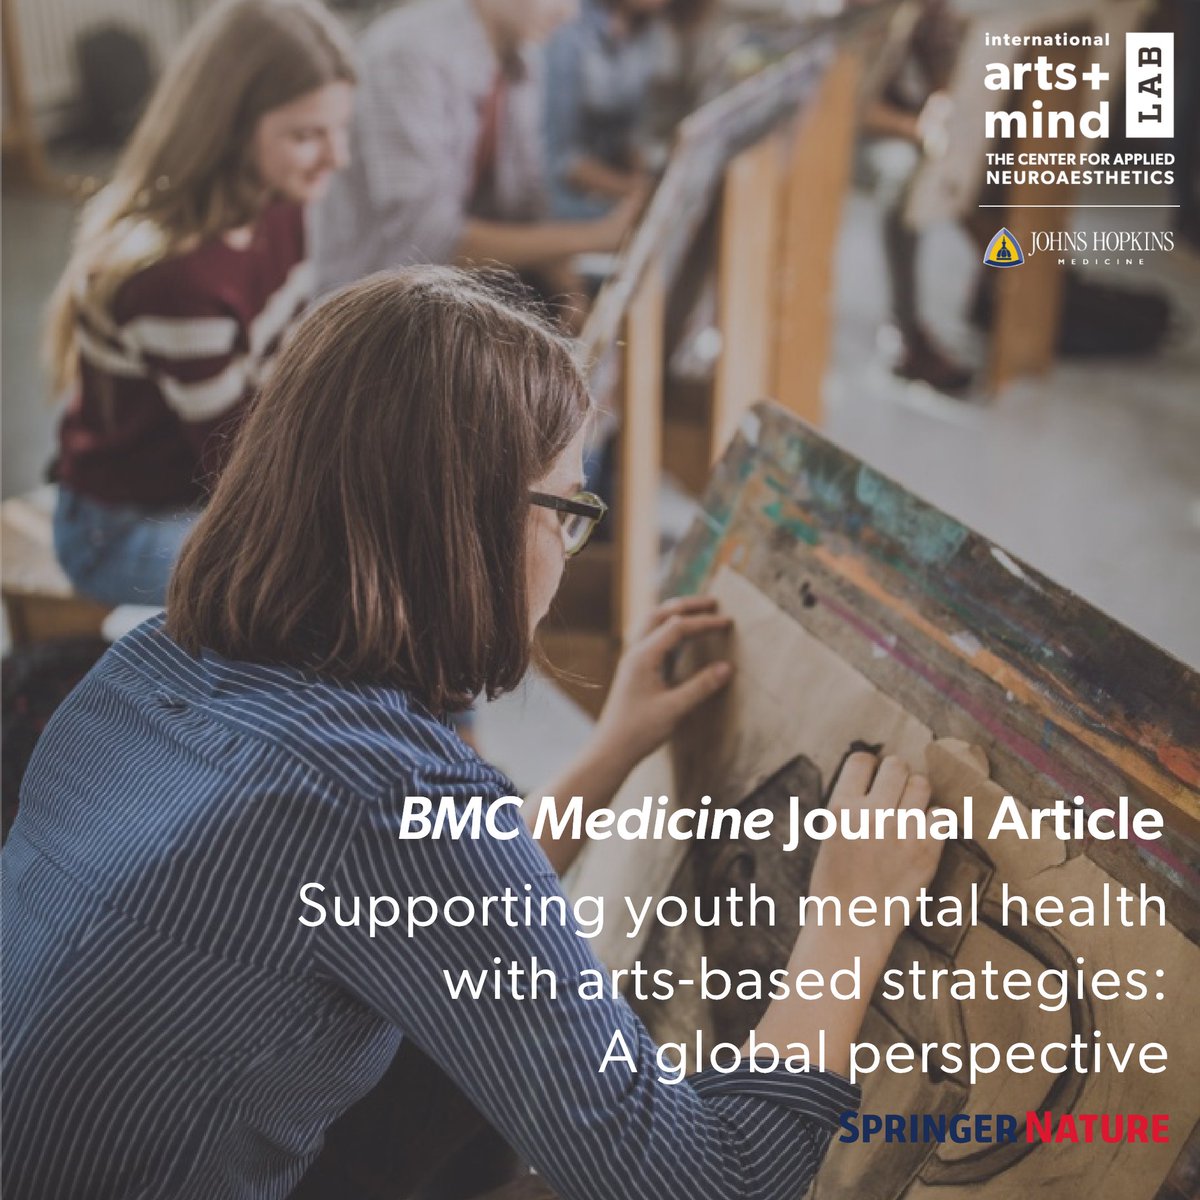 We are excited to announce the recent publication of our latest open-access peer-reviewed article from the International Arts+Mind Lab: 'Supporting youth mental health with arts-based strategies: a global perspective' To read, download & share click here: tinyurl.com/2s3mepv8